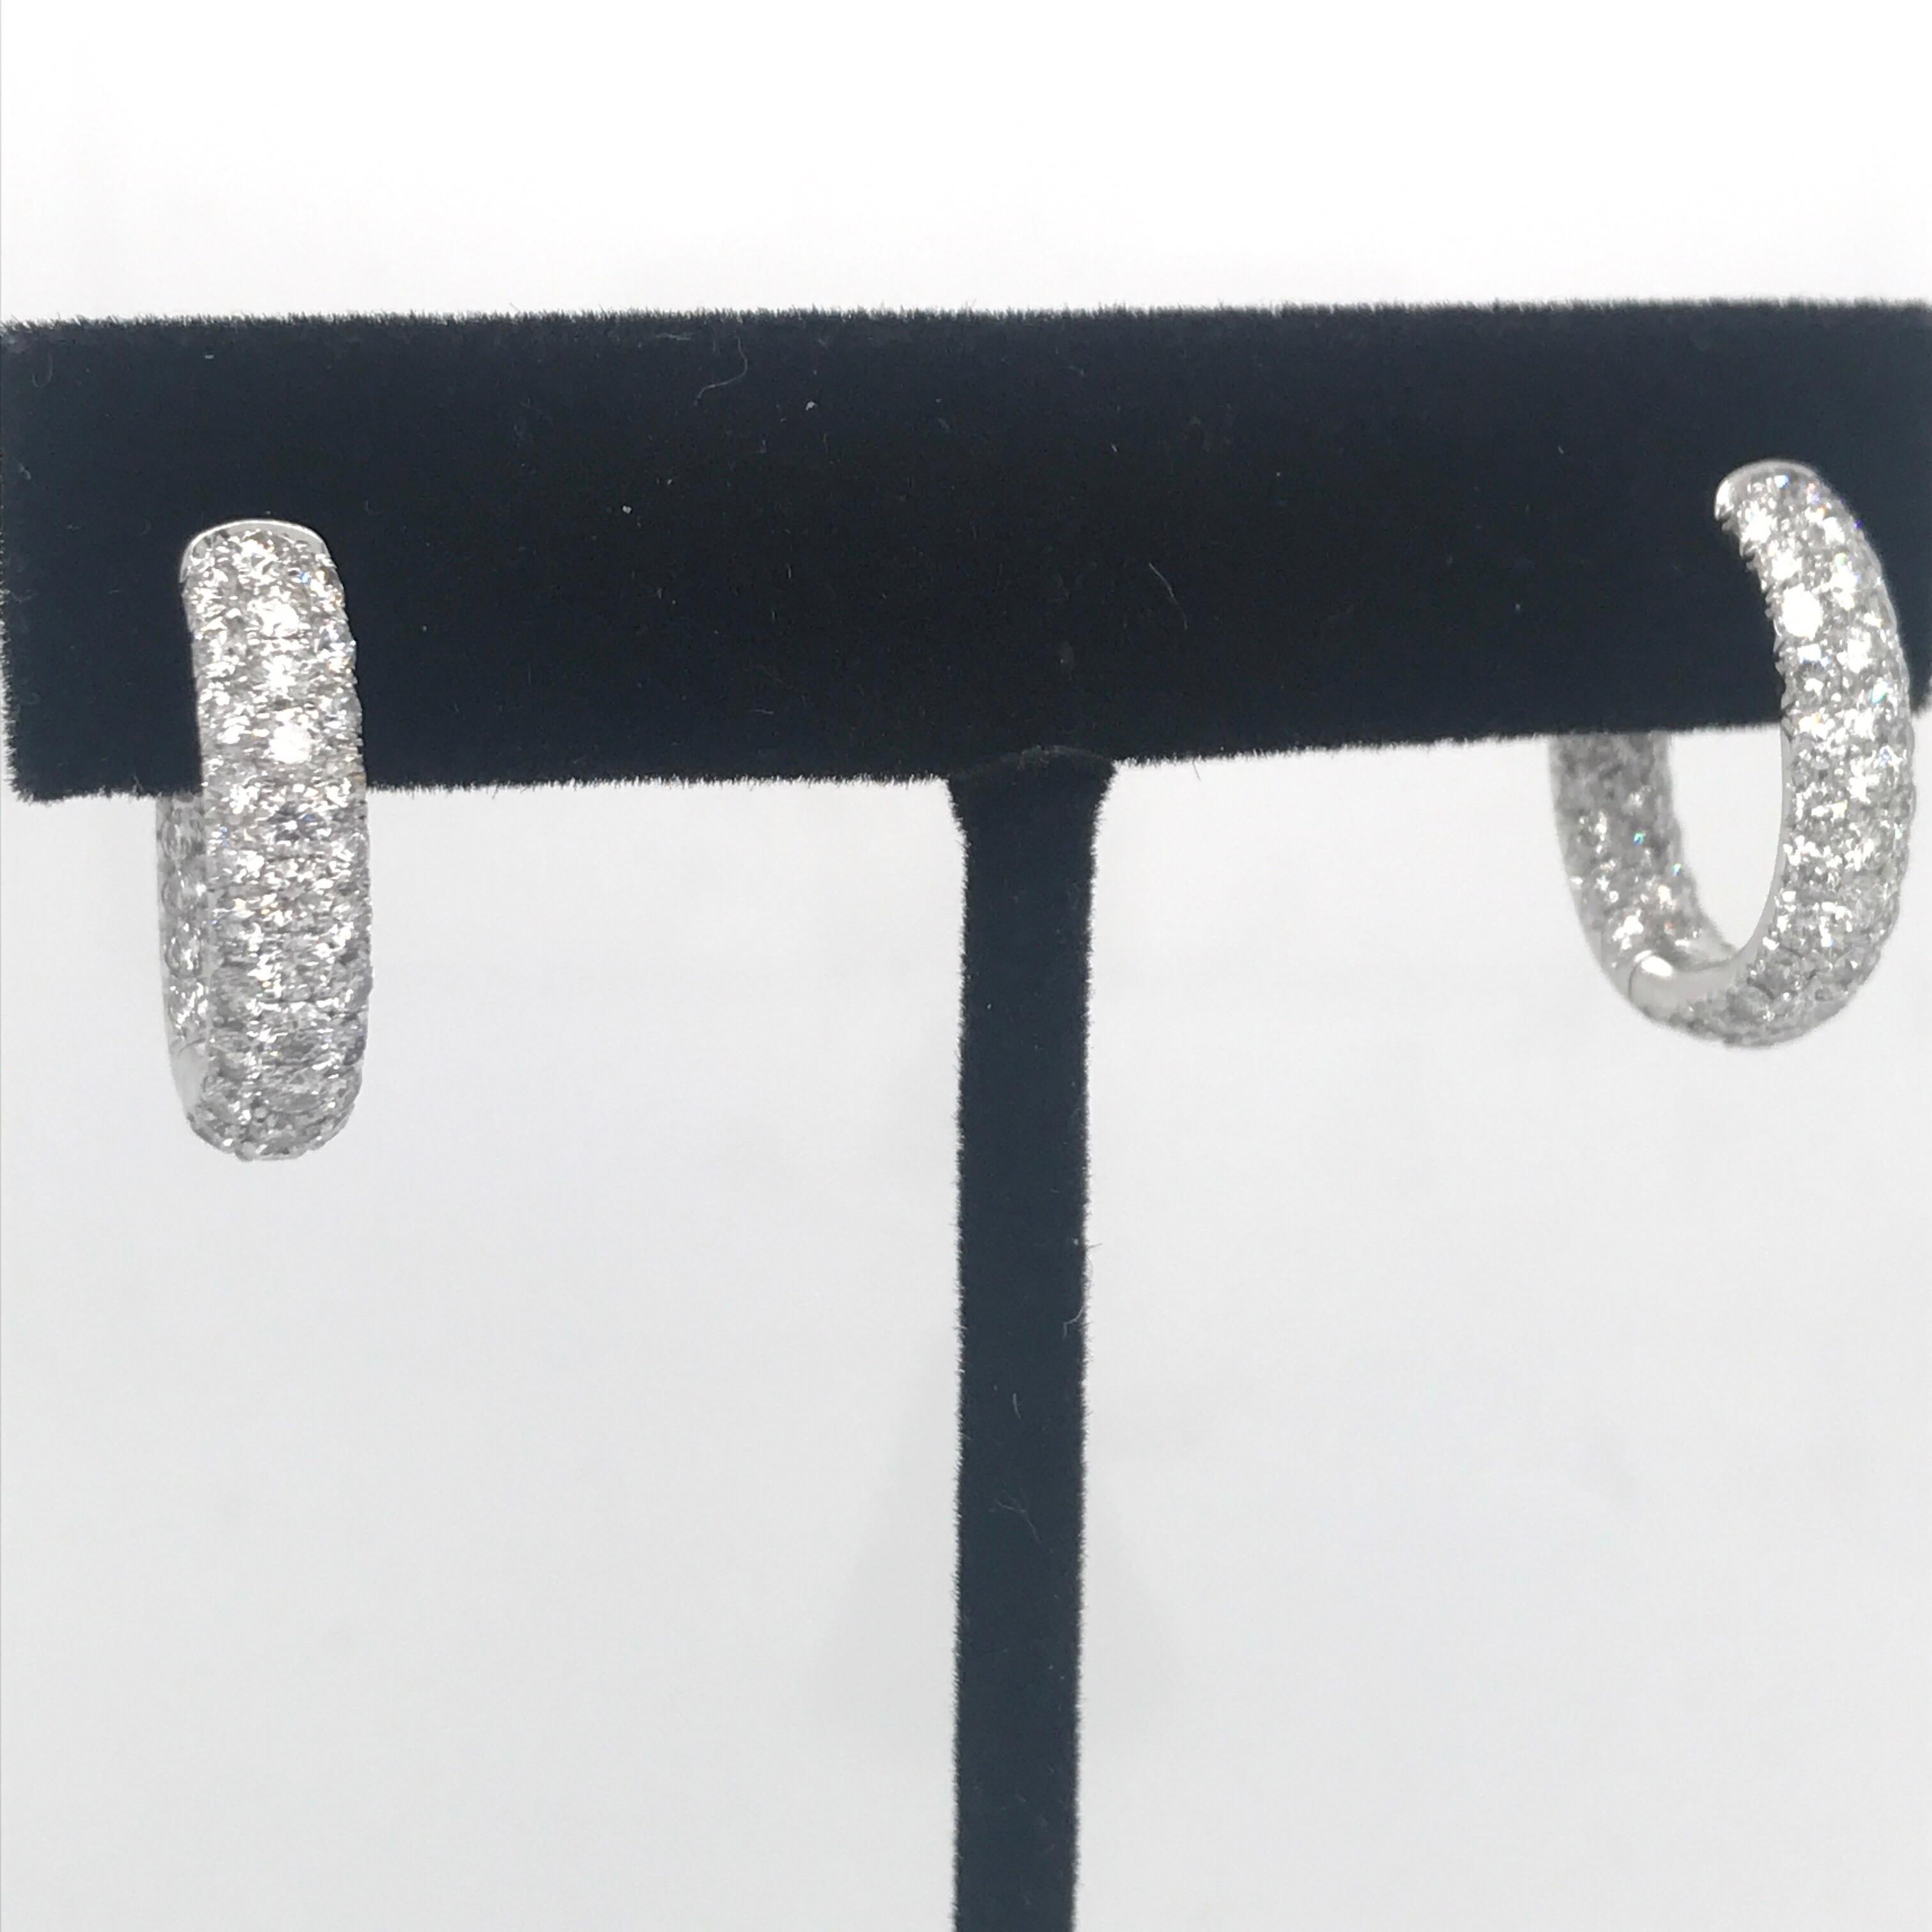 18K White gold hoop earrings featuring 122 round brilliants weighing 2.95 carats. 